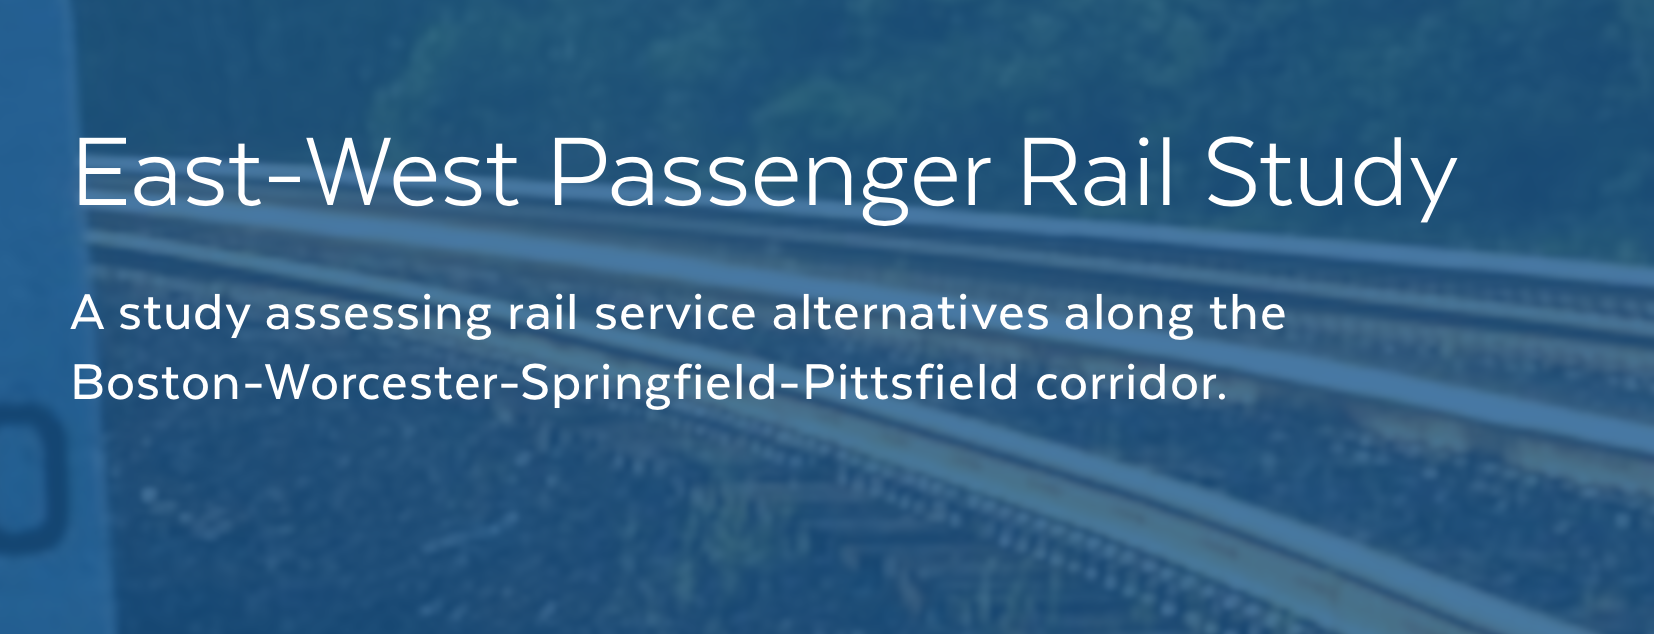 MassDOT banner with title East-West Passenger Rail Study and subheading A study assessing rail service alternatives along the Boston-Worcester-Springfield-Pittsfield corridor. Graphic shows curving train tracks in the background.